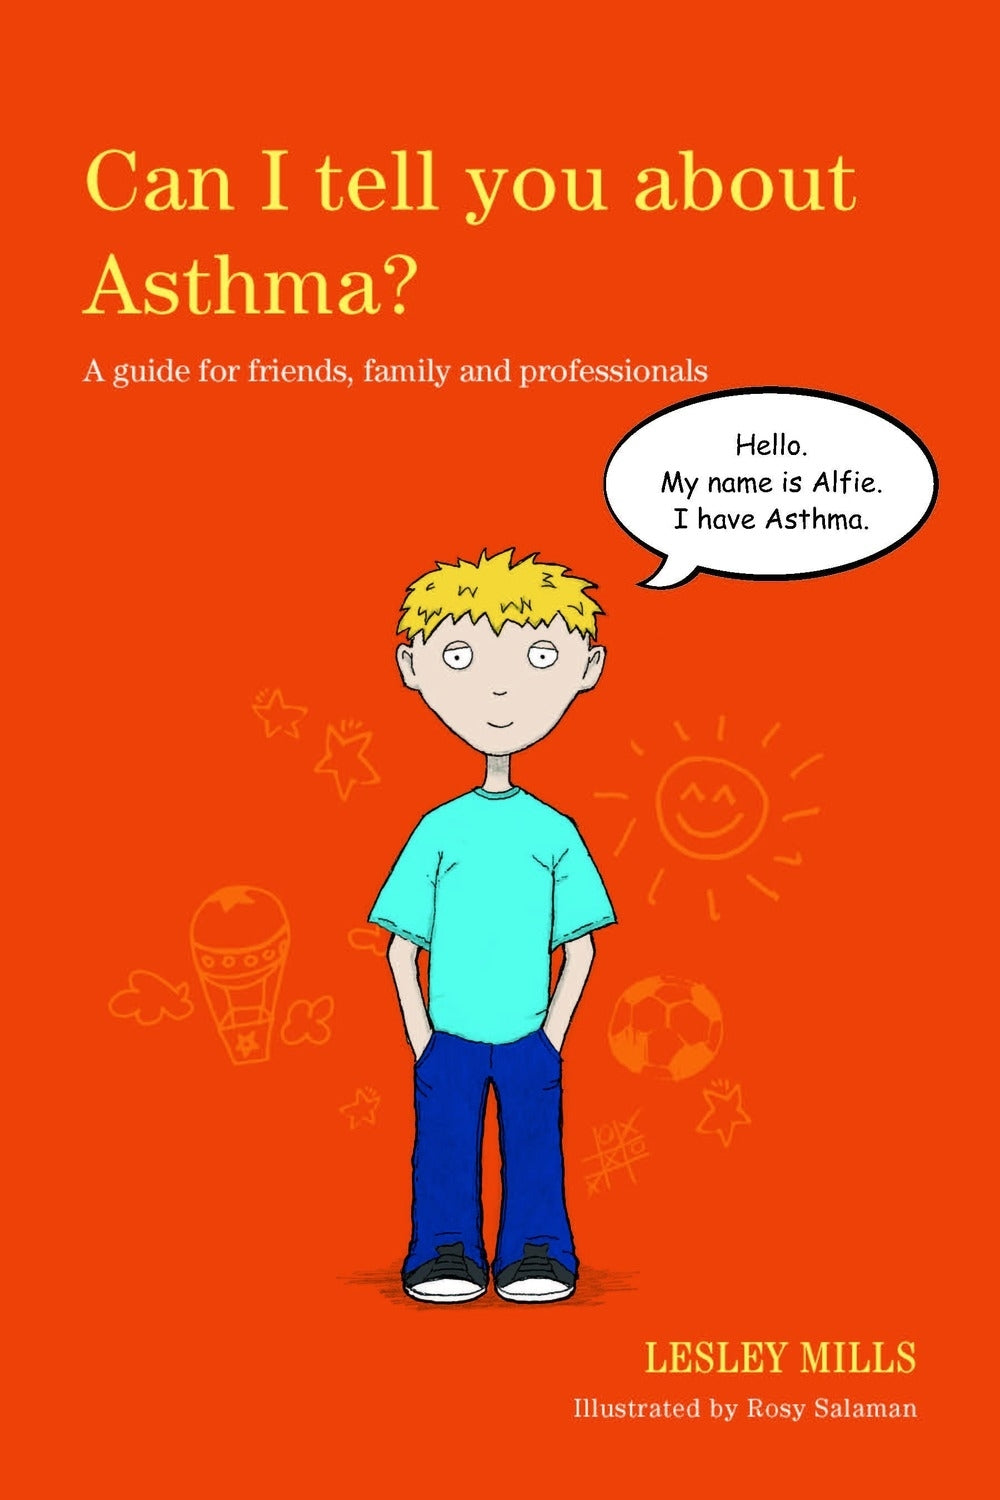 Can I tell you about Asthma? by Lesley Mills, Rosy Salaman